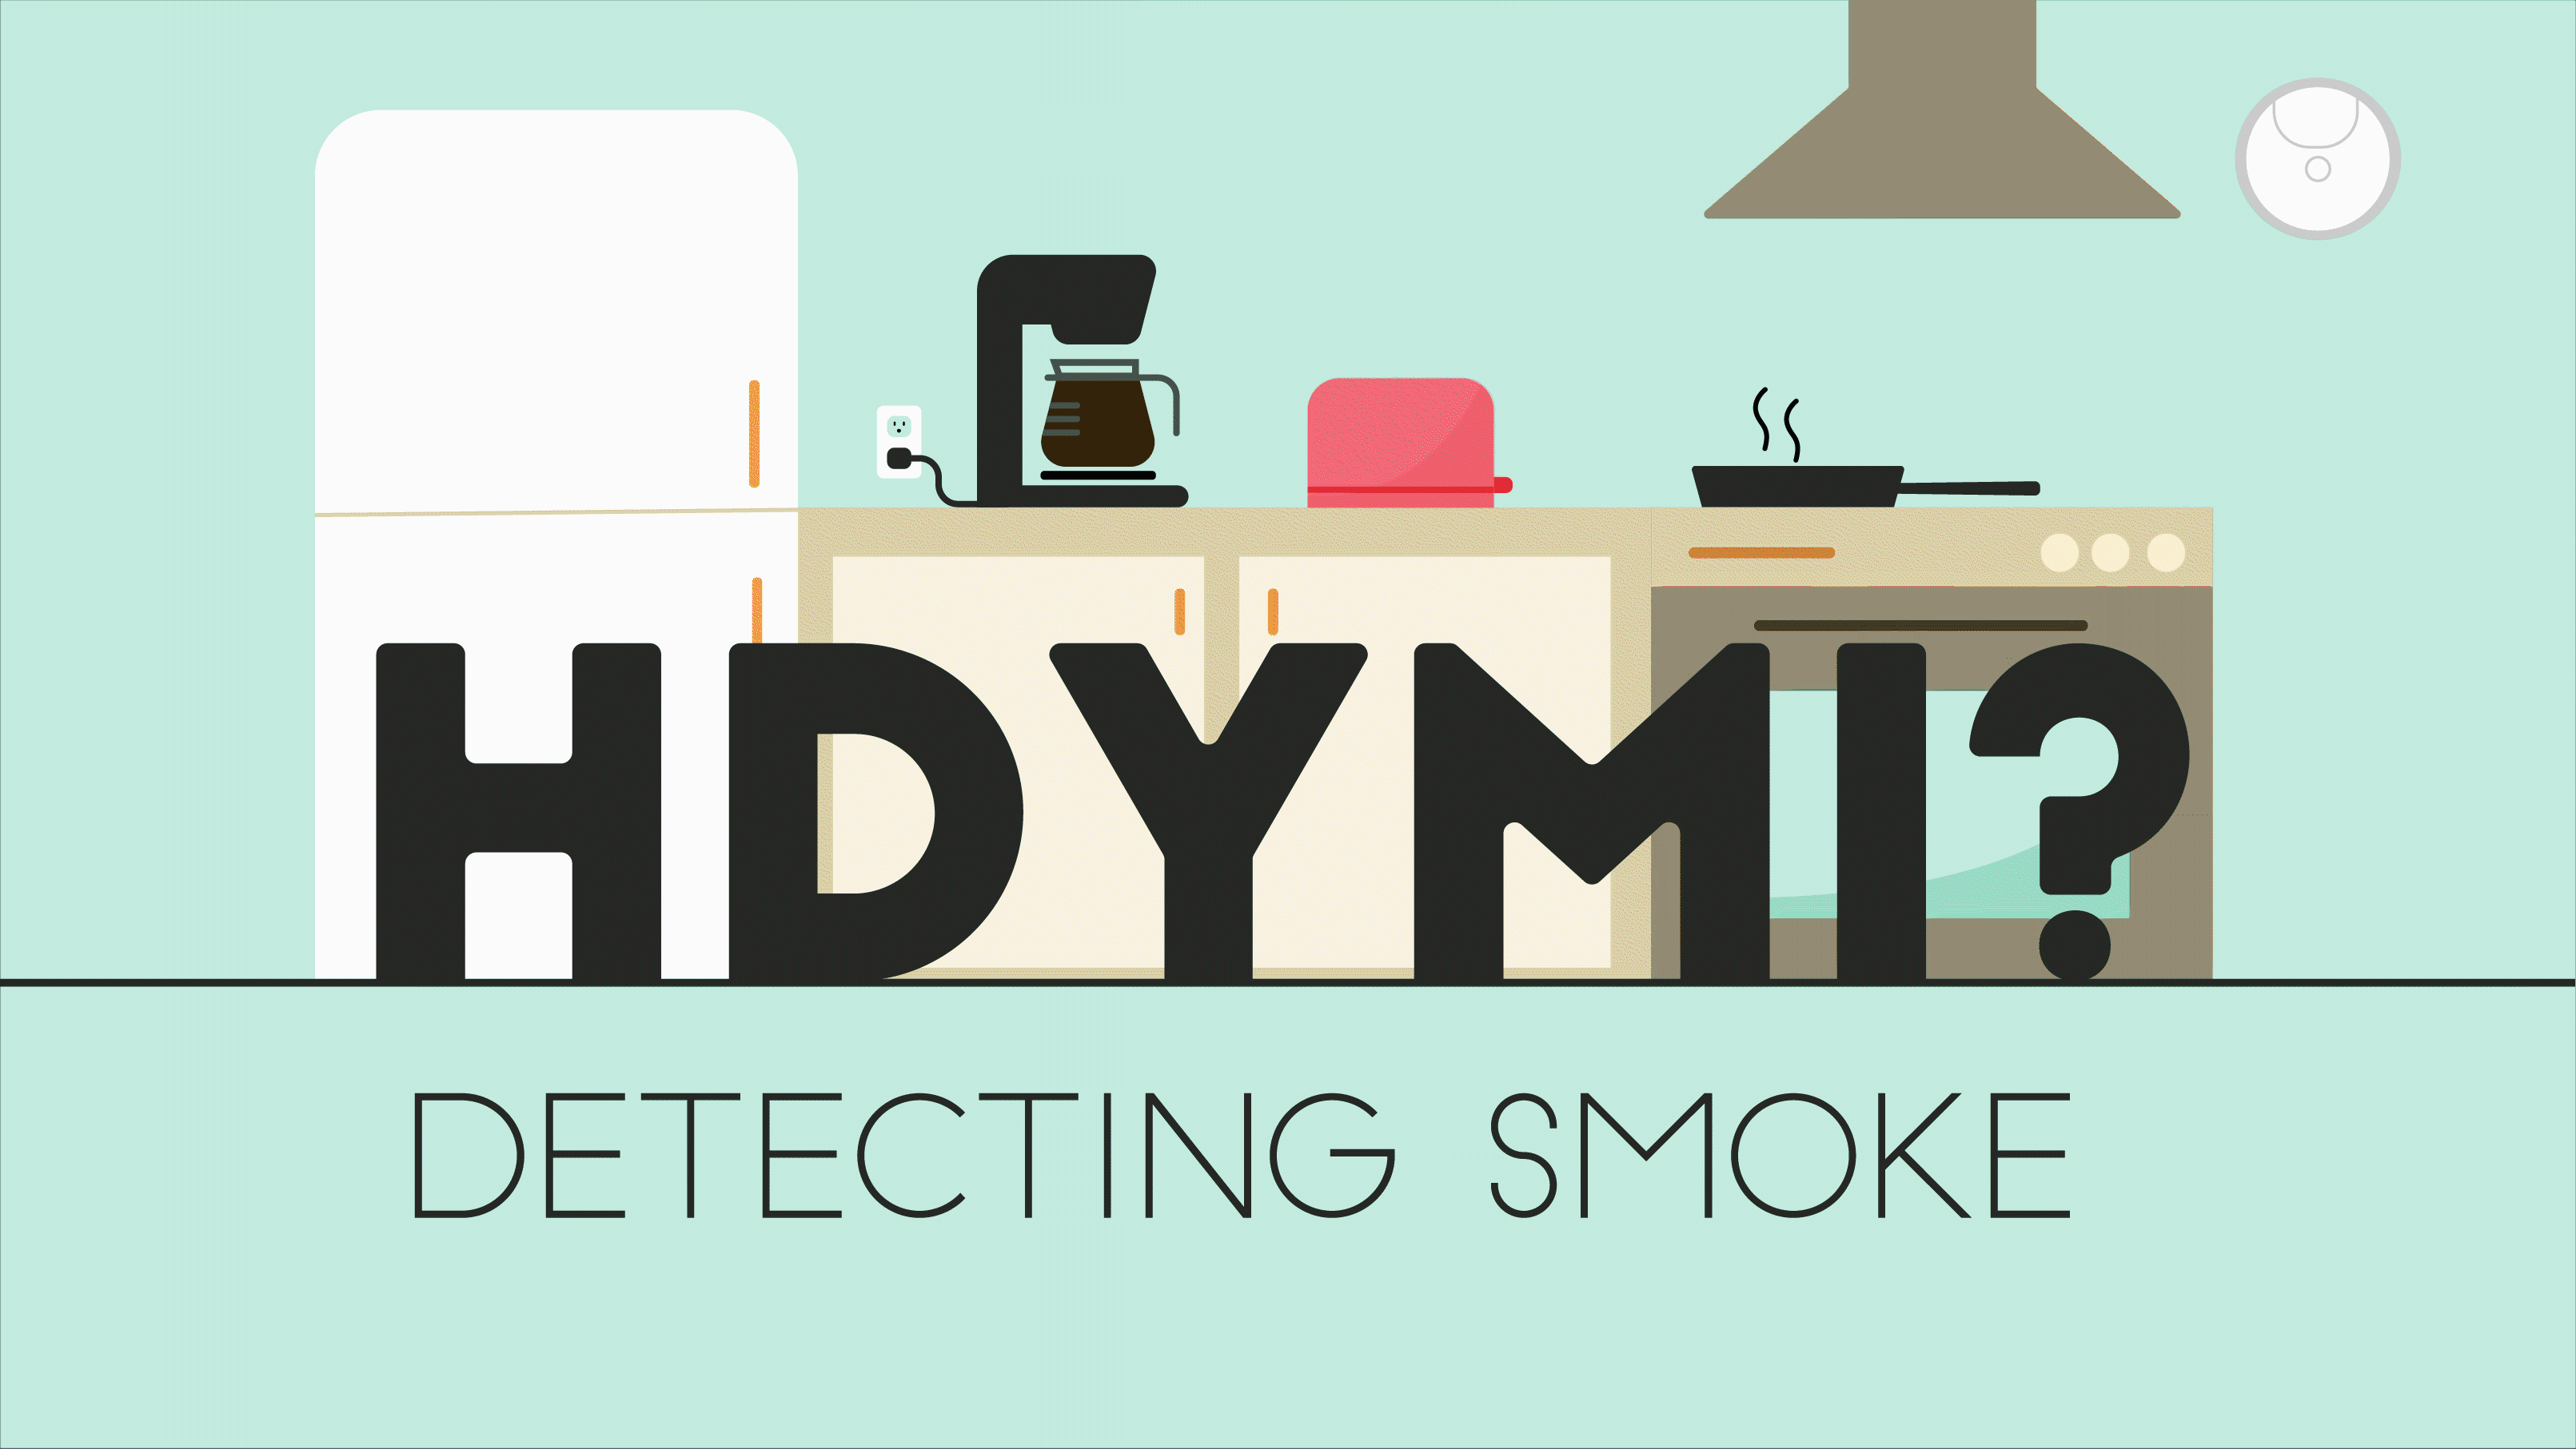 Animated illustration of kitchen appliances showing toast popping up and soundwaves coming from smoke alarm is labeled "HDYMI? Detecting Smoke."